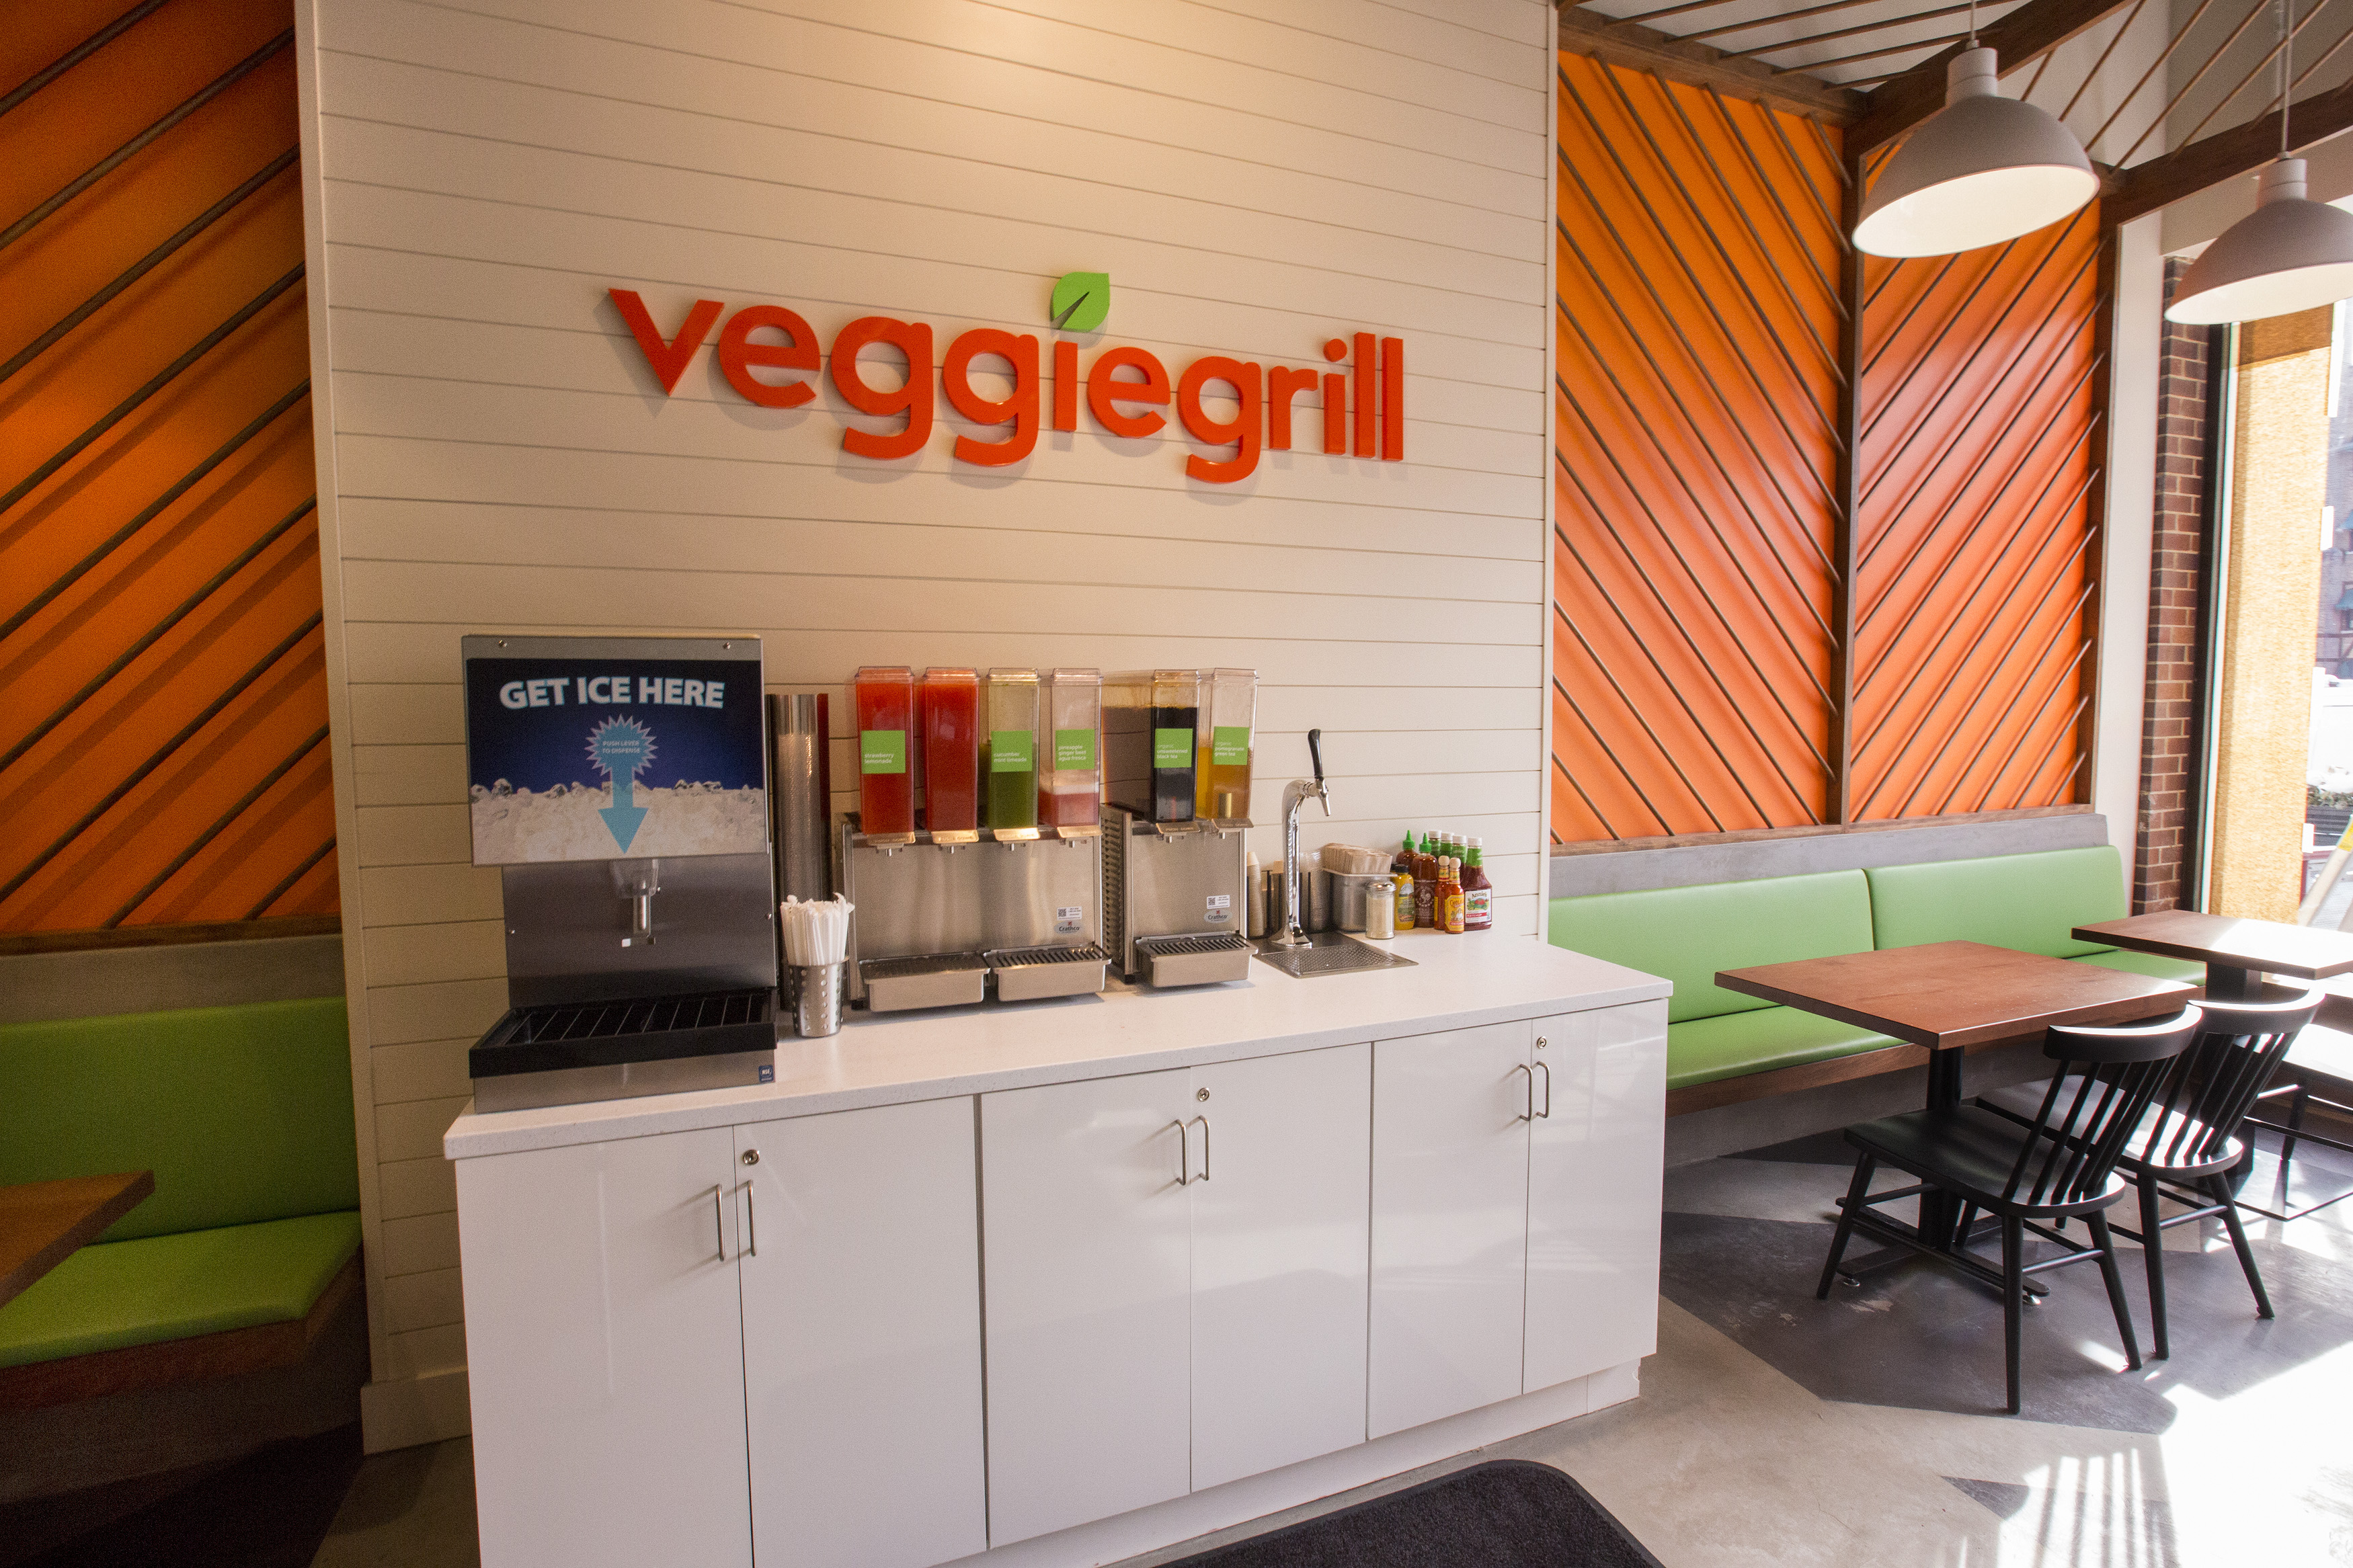 A wall with the words “Veggie Grill” in orange above a condiment stand.